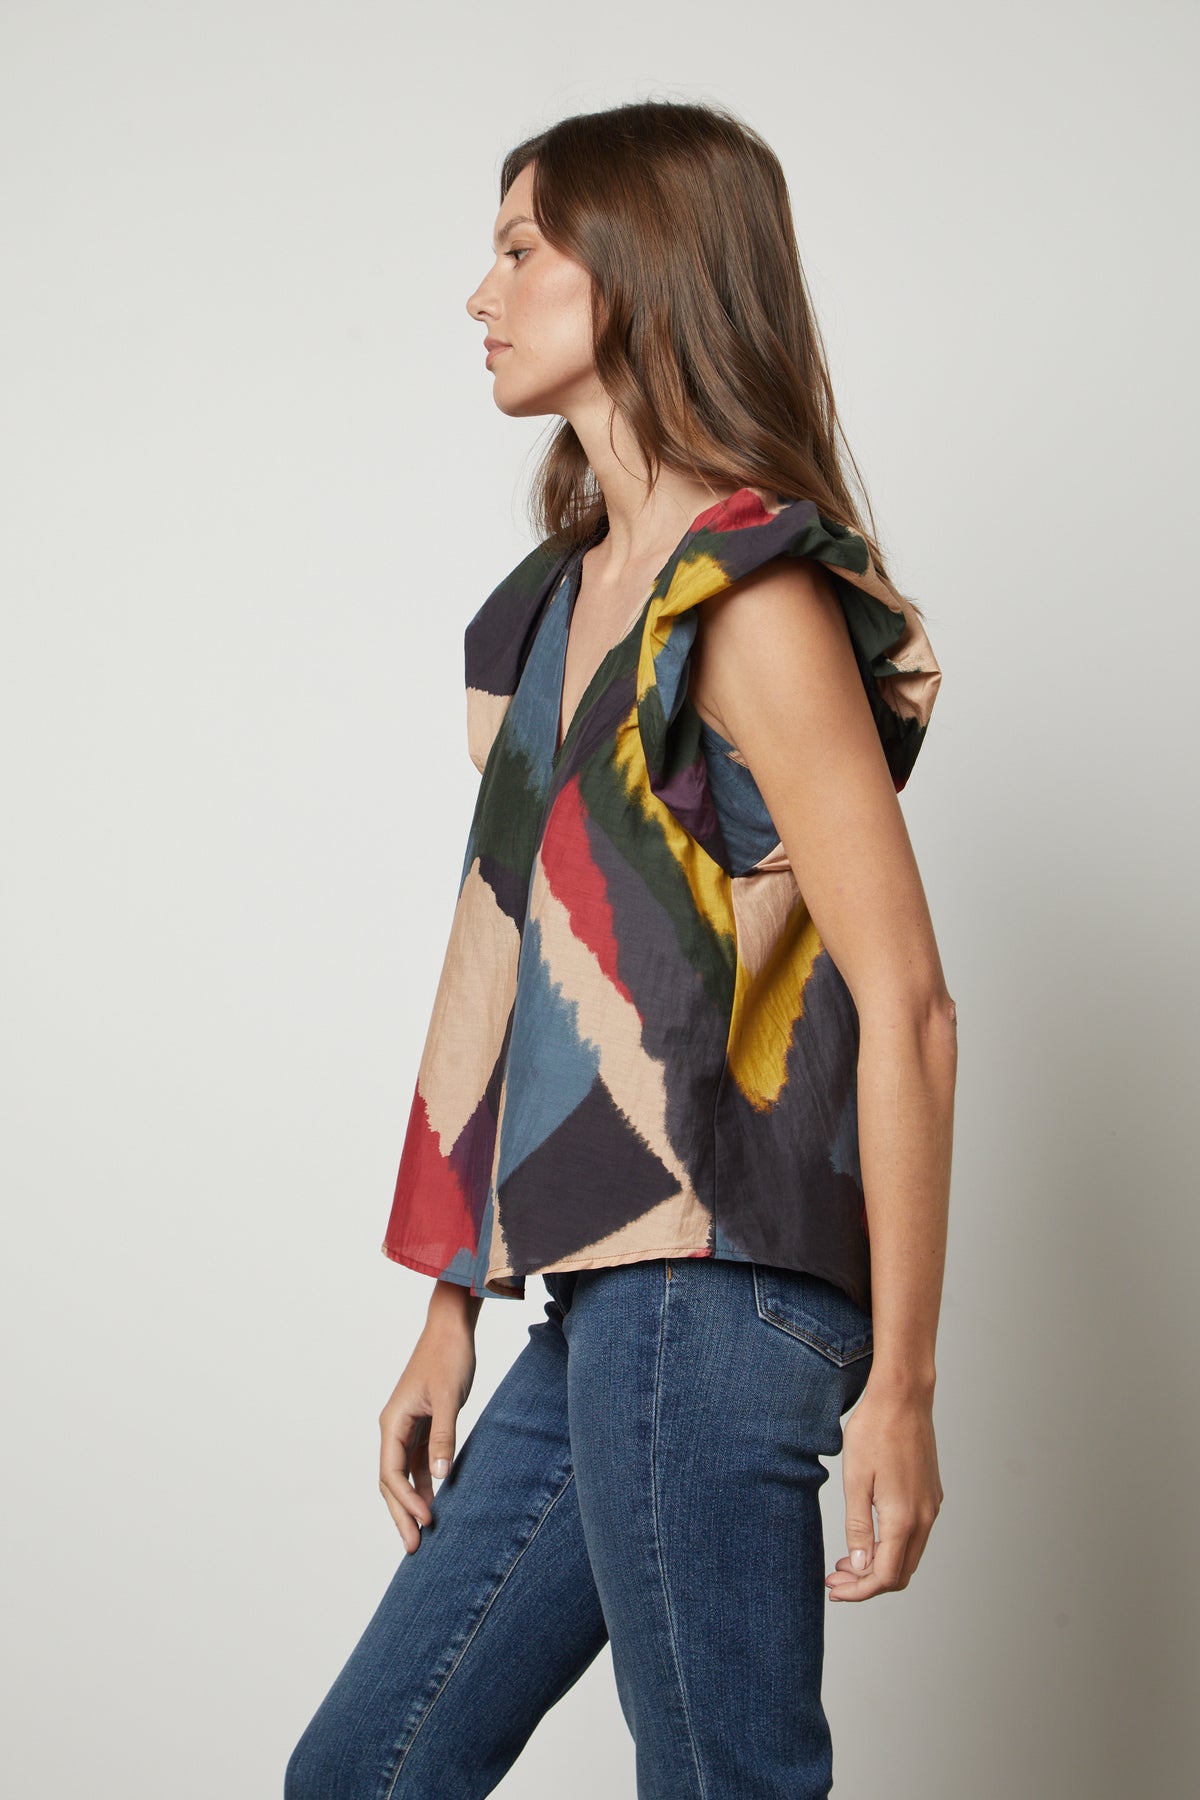 The model is wearing the Velvet by Graham & Spencer TAMARA PRINTED TOP with flutter sleeves.-35655953809601